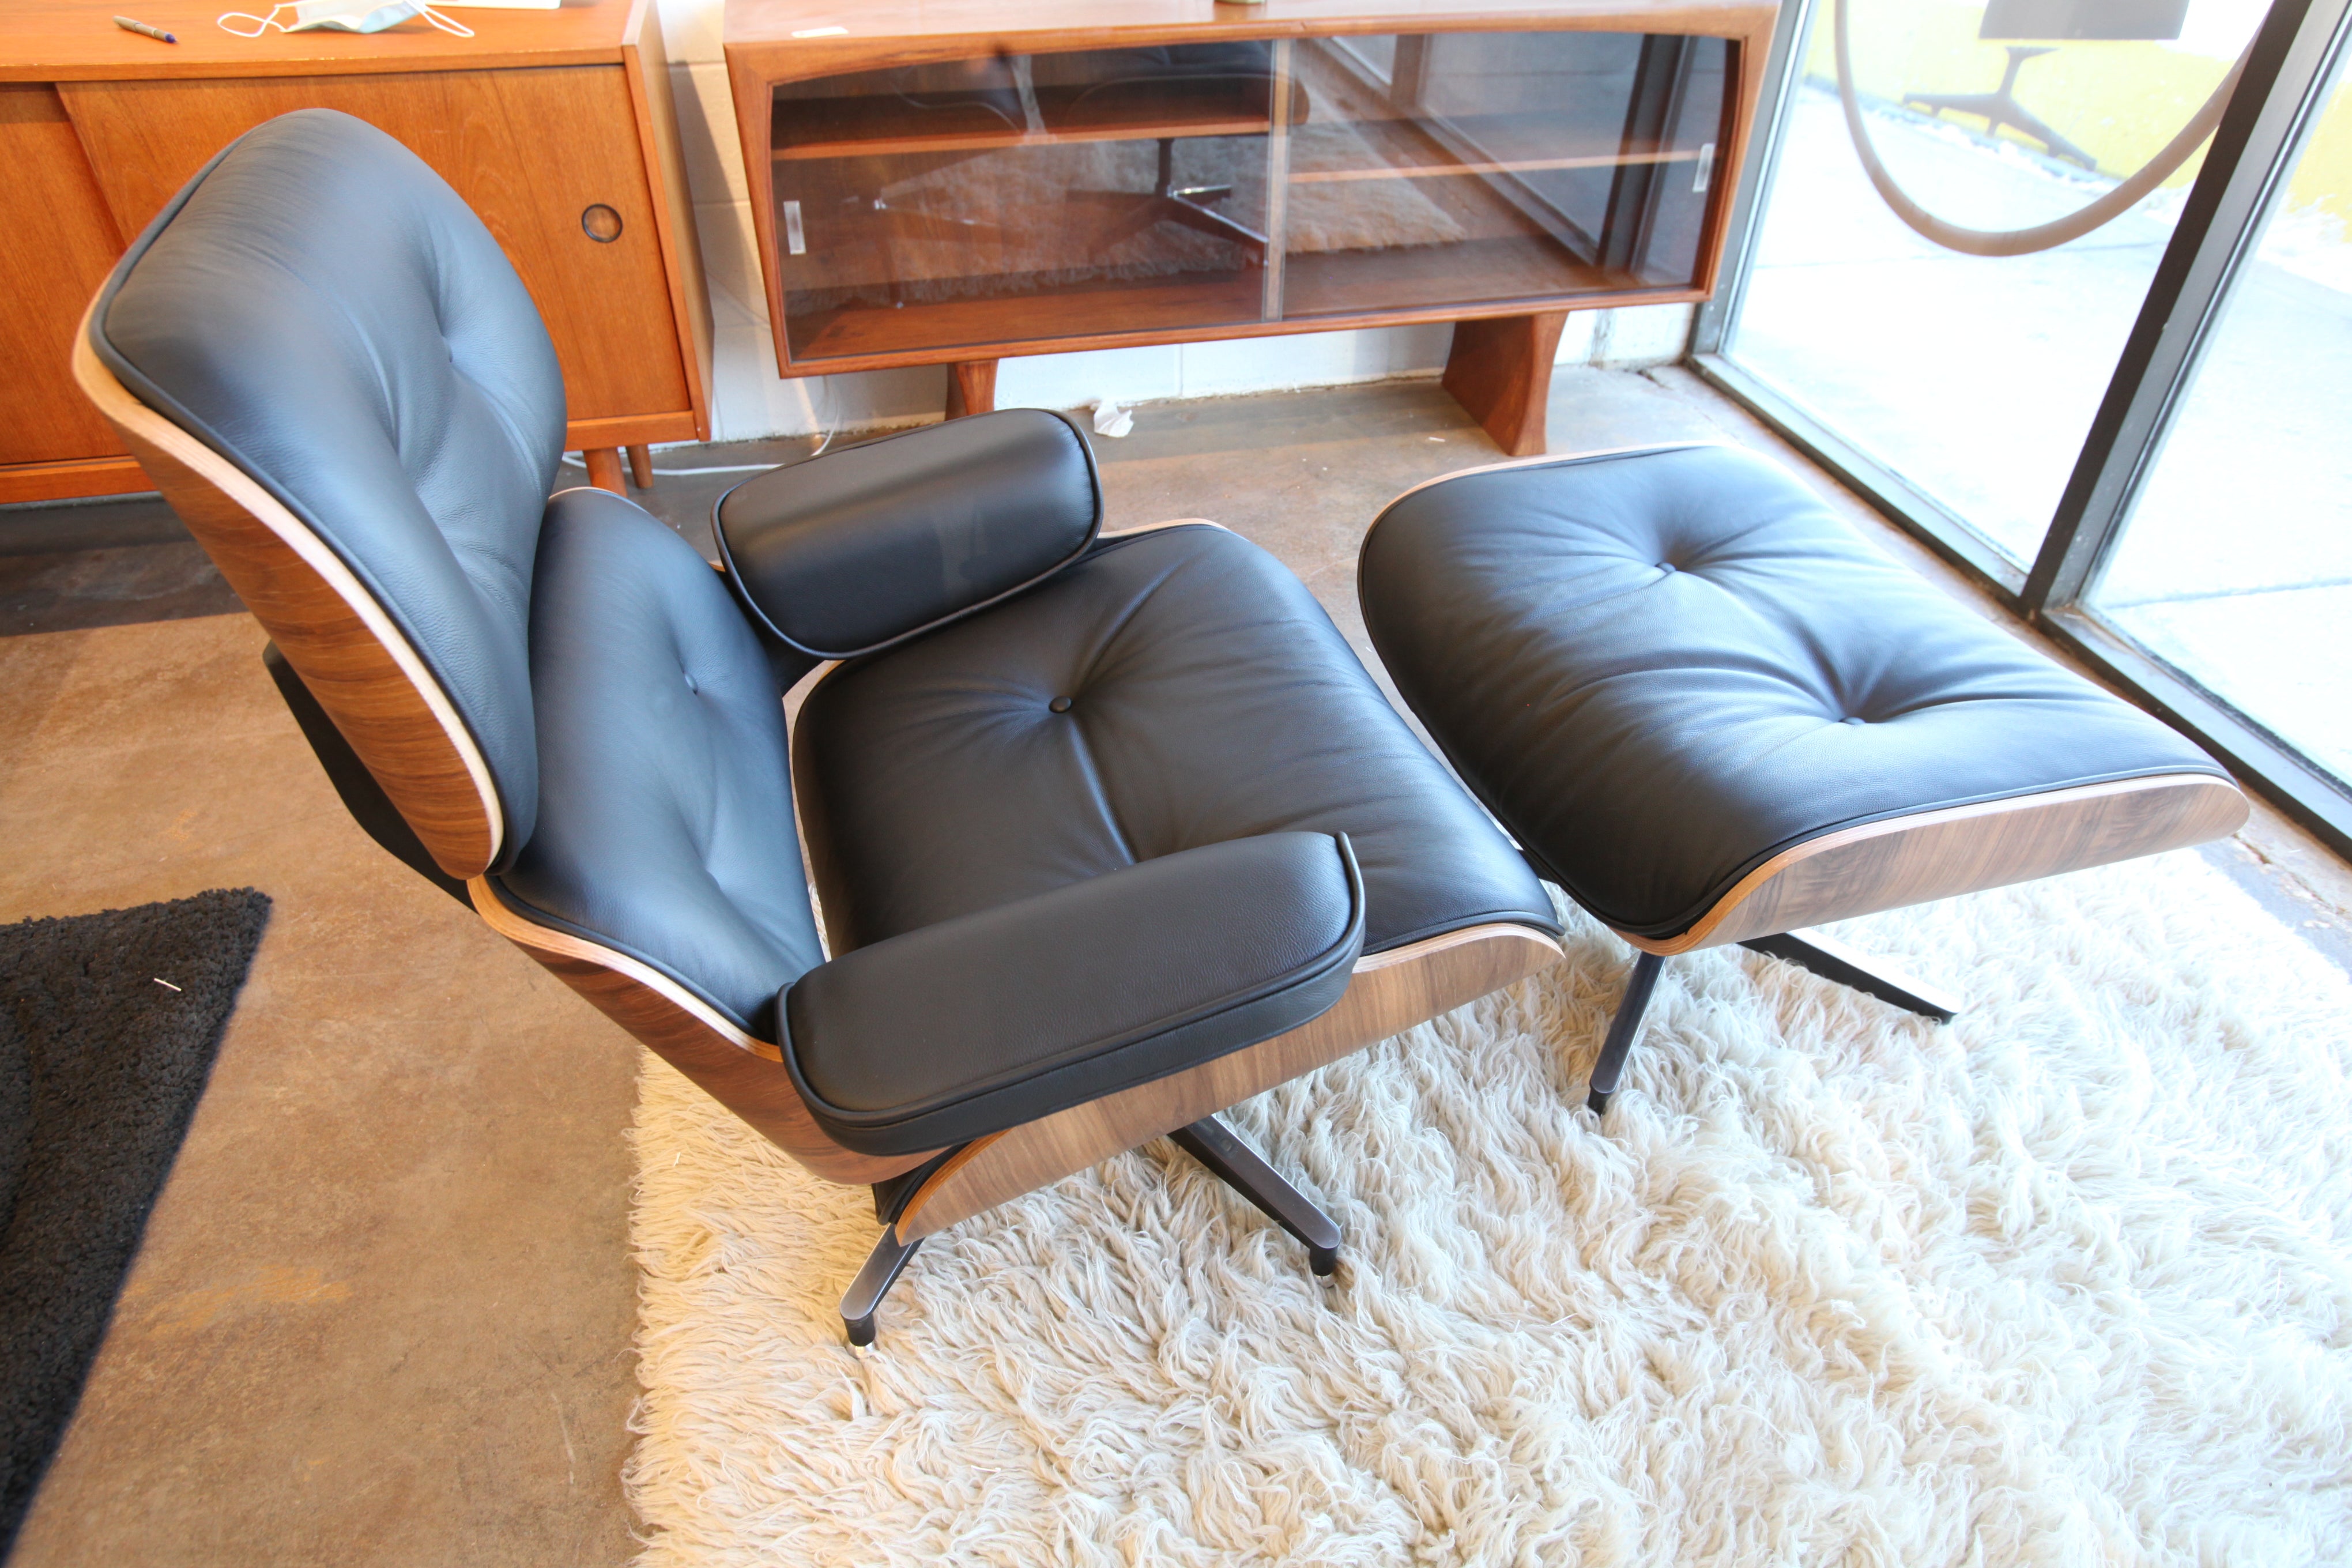 New High End Replica Eames Chair and Ottoman (Walnut Wood / Black Leather)